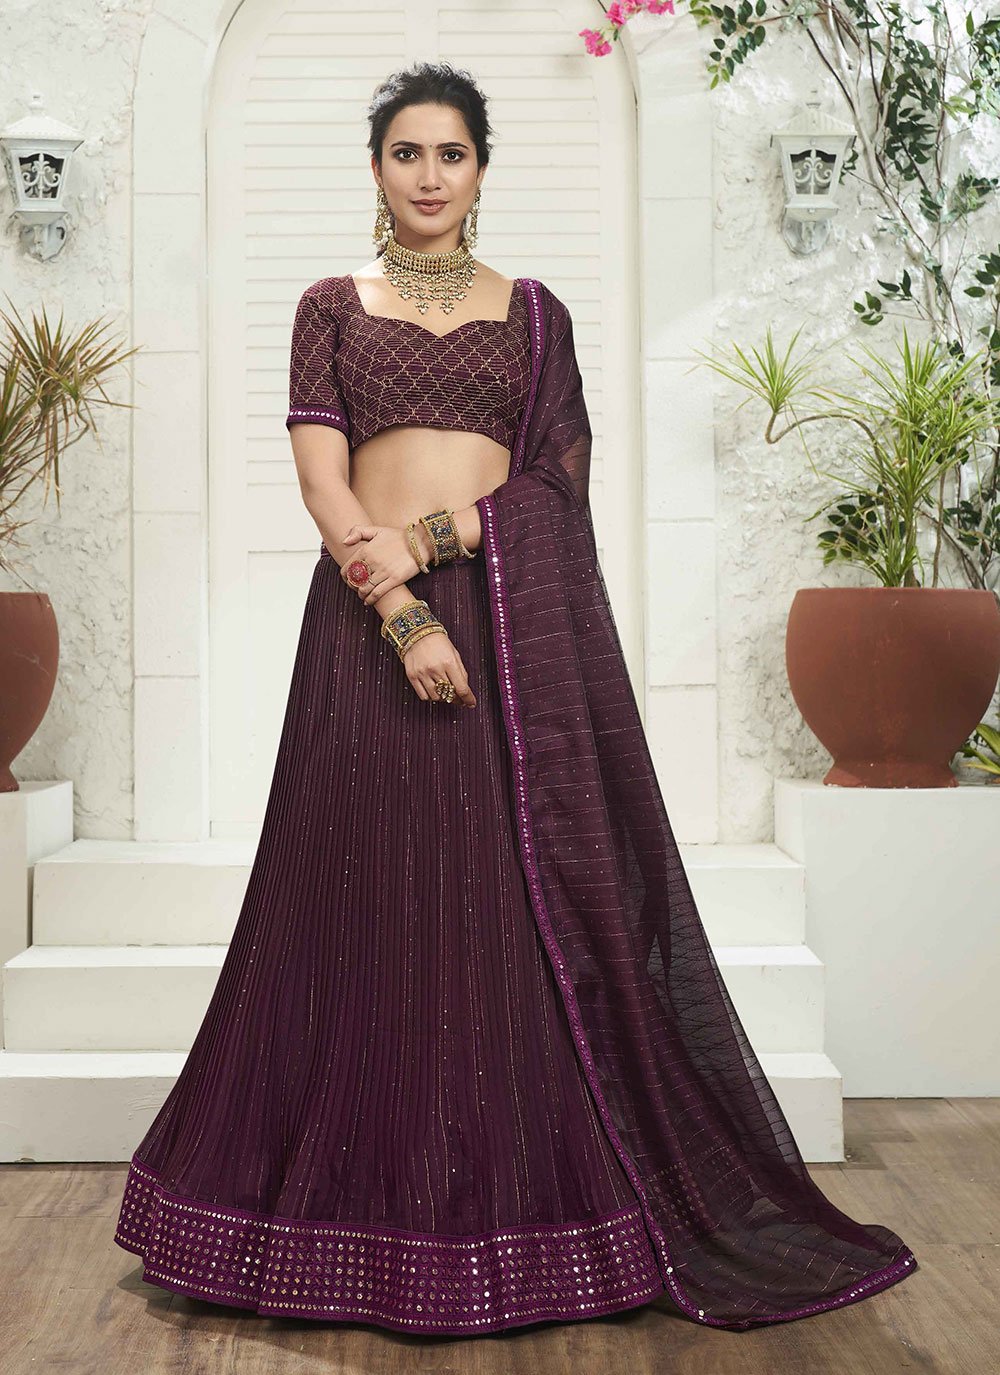 15 Latest Collection of Lehenga with Kurta Designs In India | Long blouse  designs, Party wear dresses, Indian fashion dresses